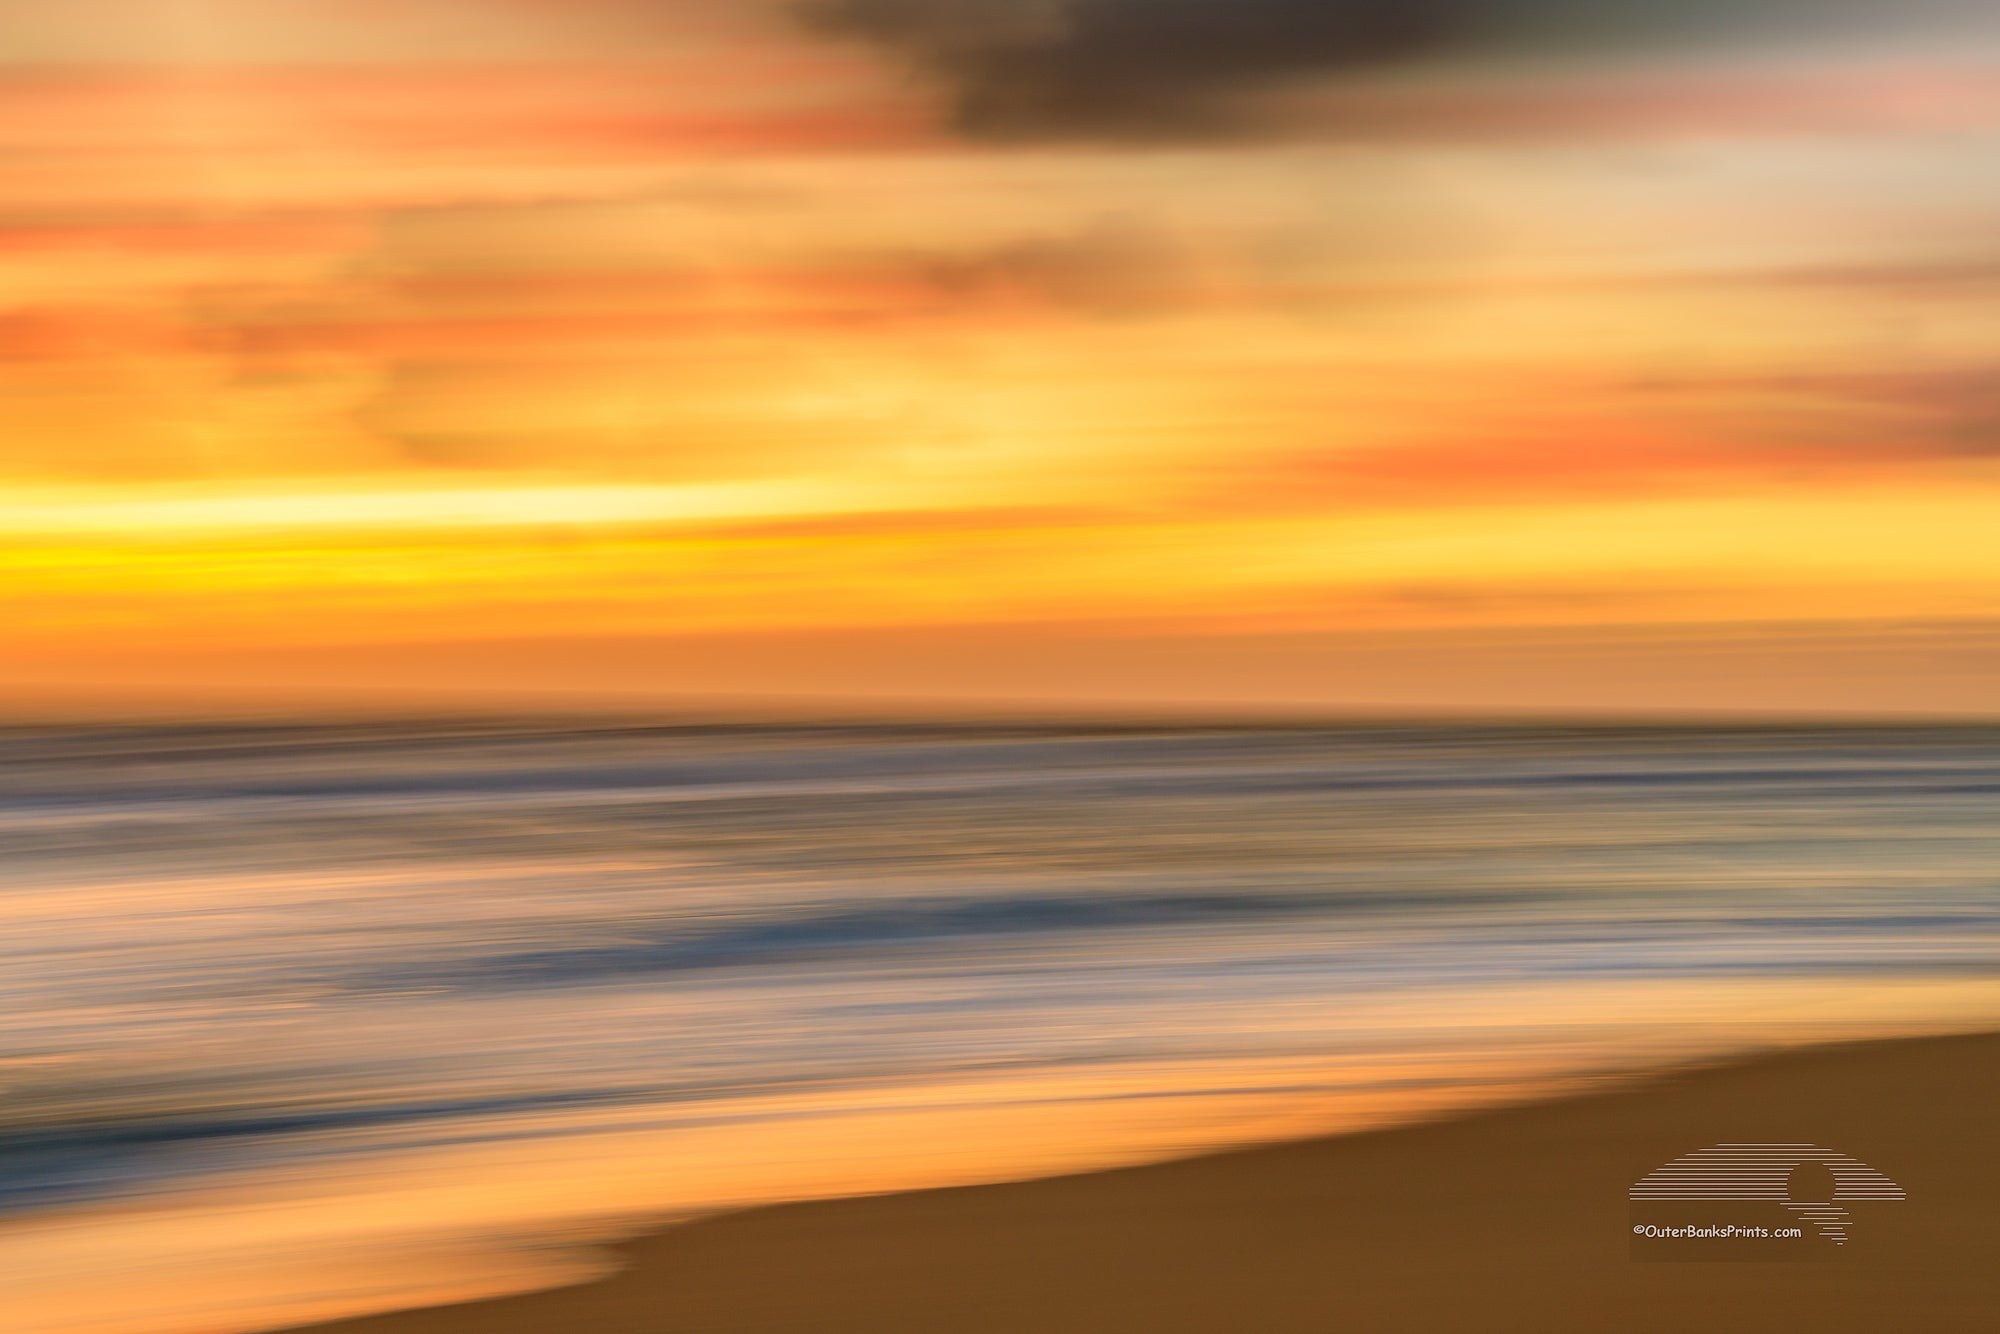 Soft gold sunrise Beach photo was created by using a long shutter speed and moving the camera a Kill Devil Hills beach on the outer banks of NC.